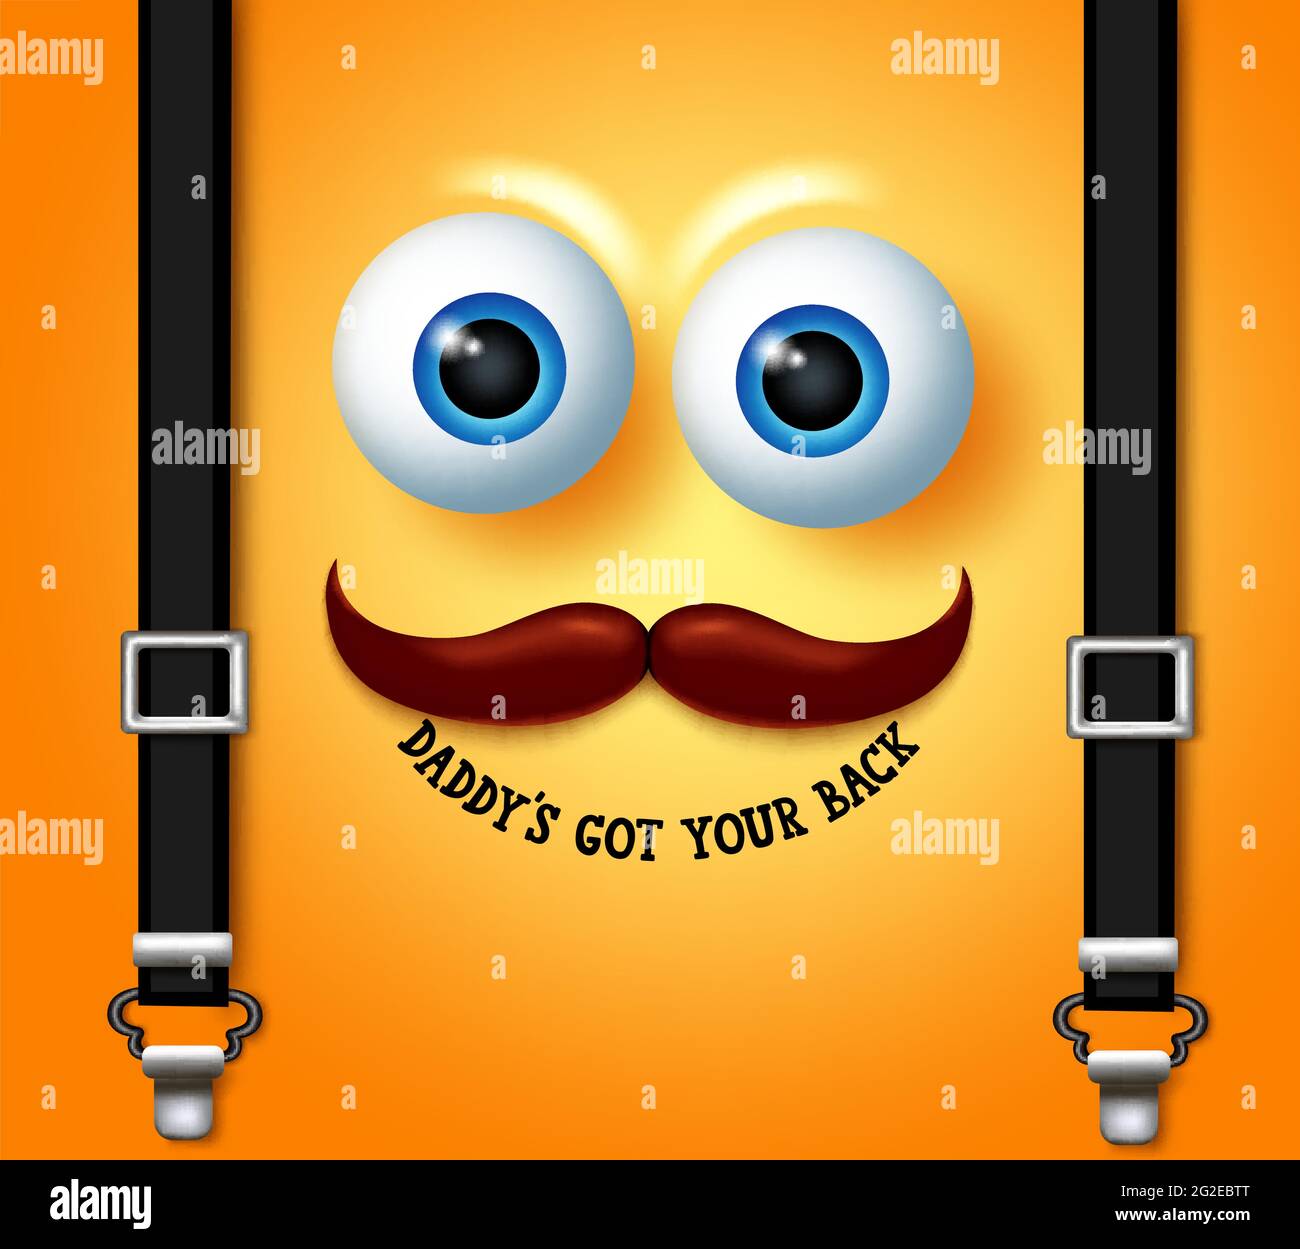 Father's day emoji vector design. Daddy's got your back text in yellow smiling face with elements like mustache and suspender belt for celebrating. Stock Vector